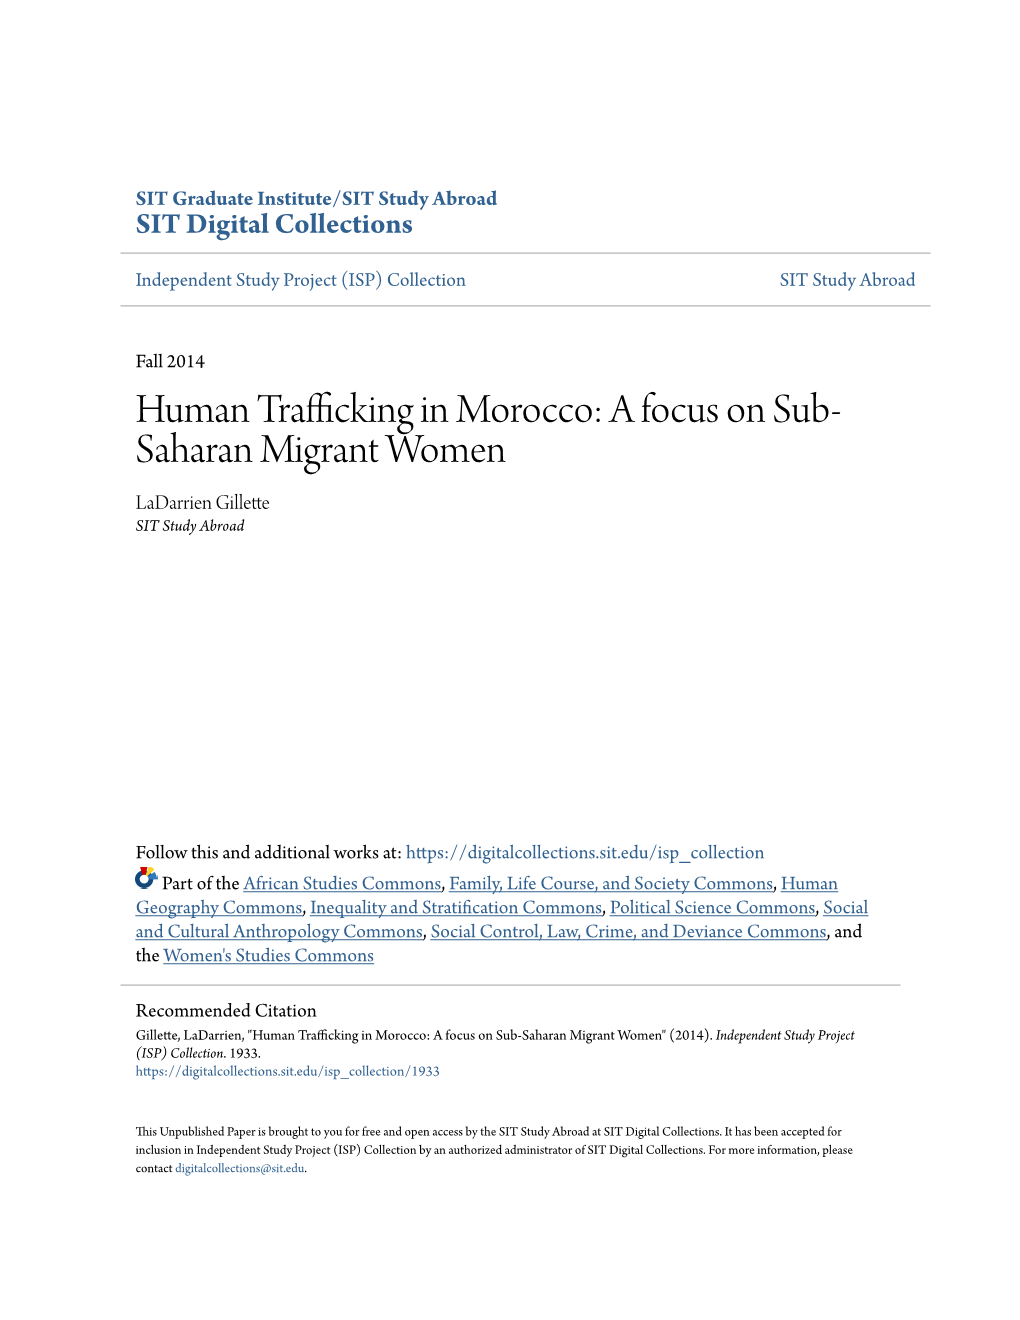 Human Trafficking in Morocco: a Focus on Sub- Saharan Migrant Women Ladarrien Gillette SIT Study Abroad